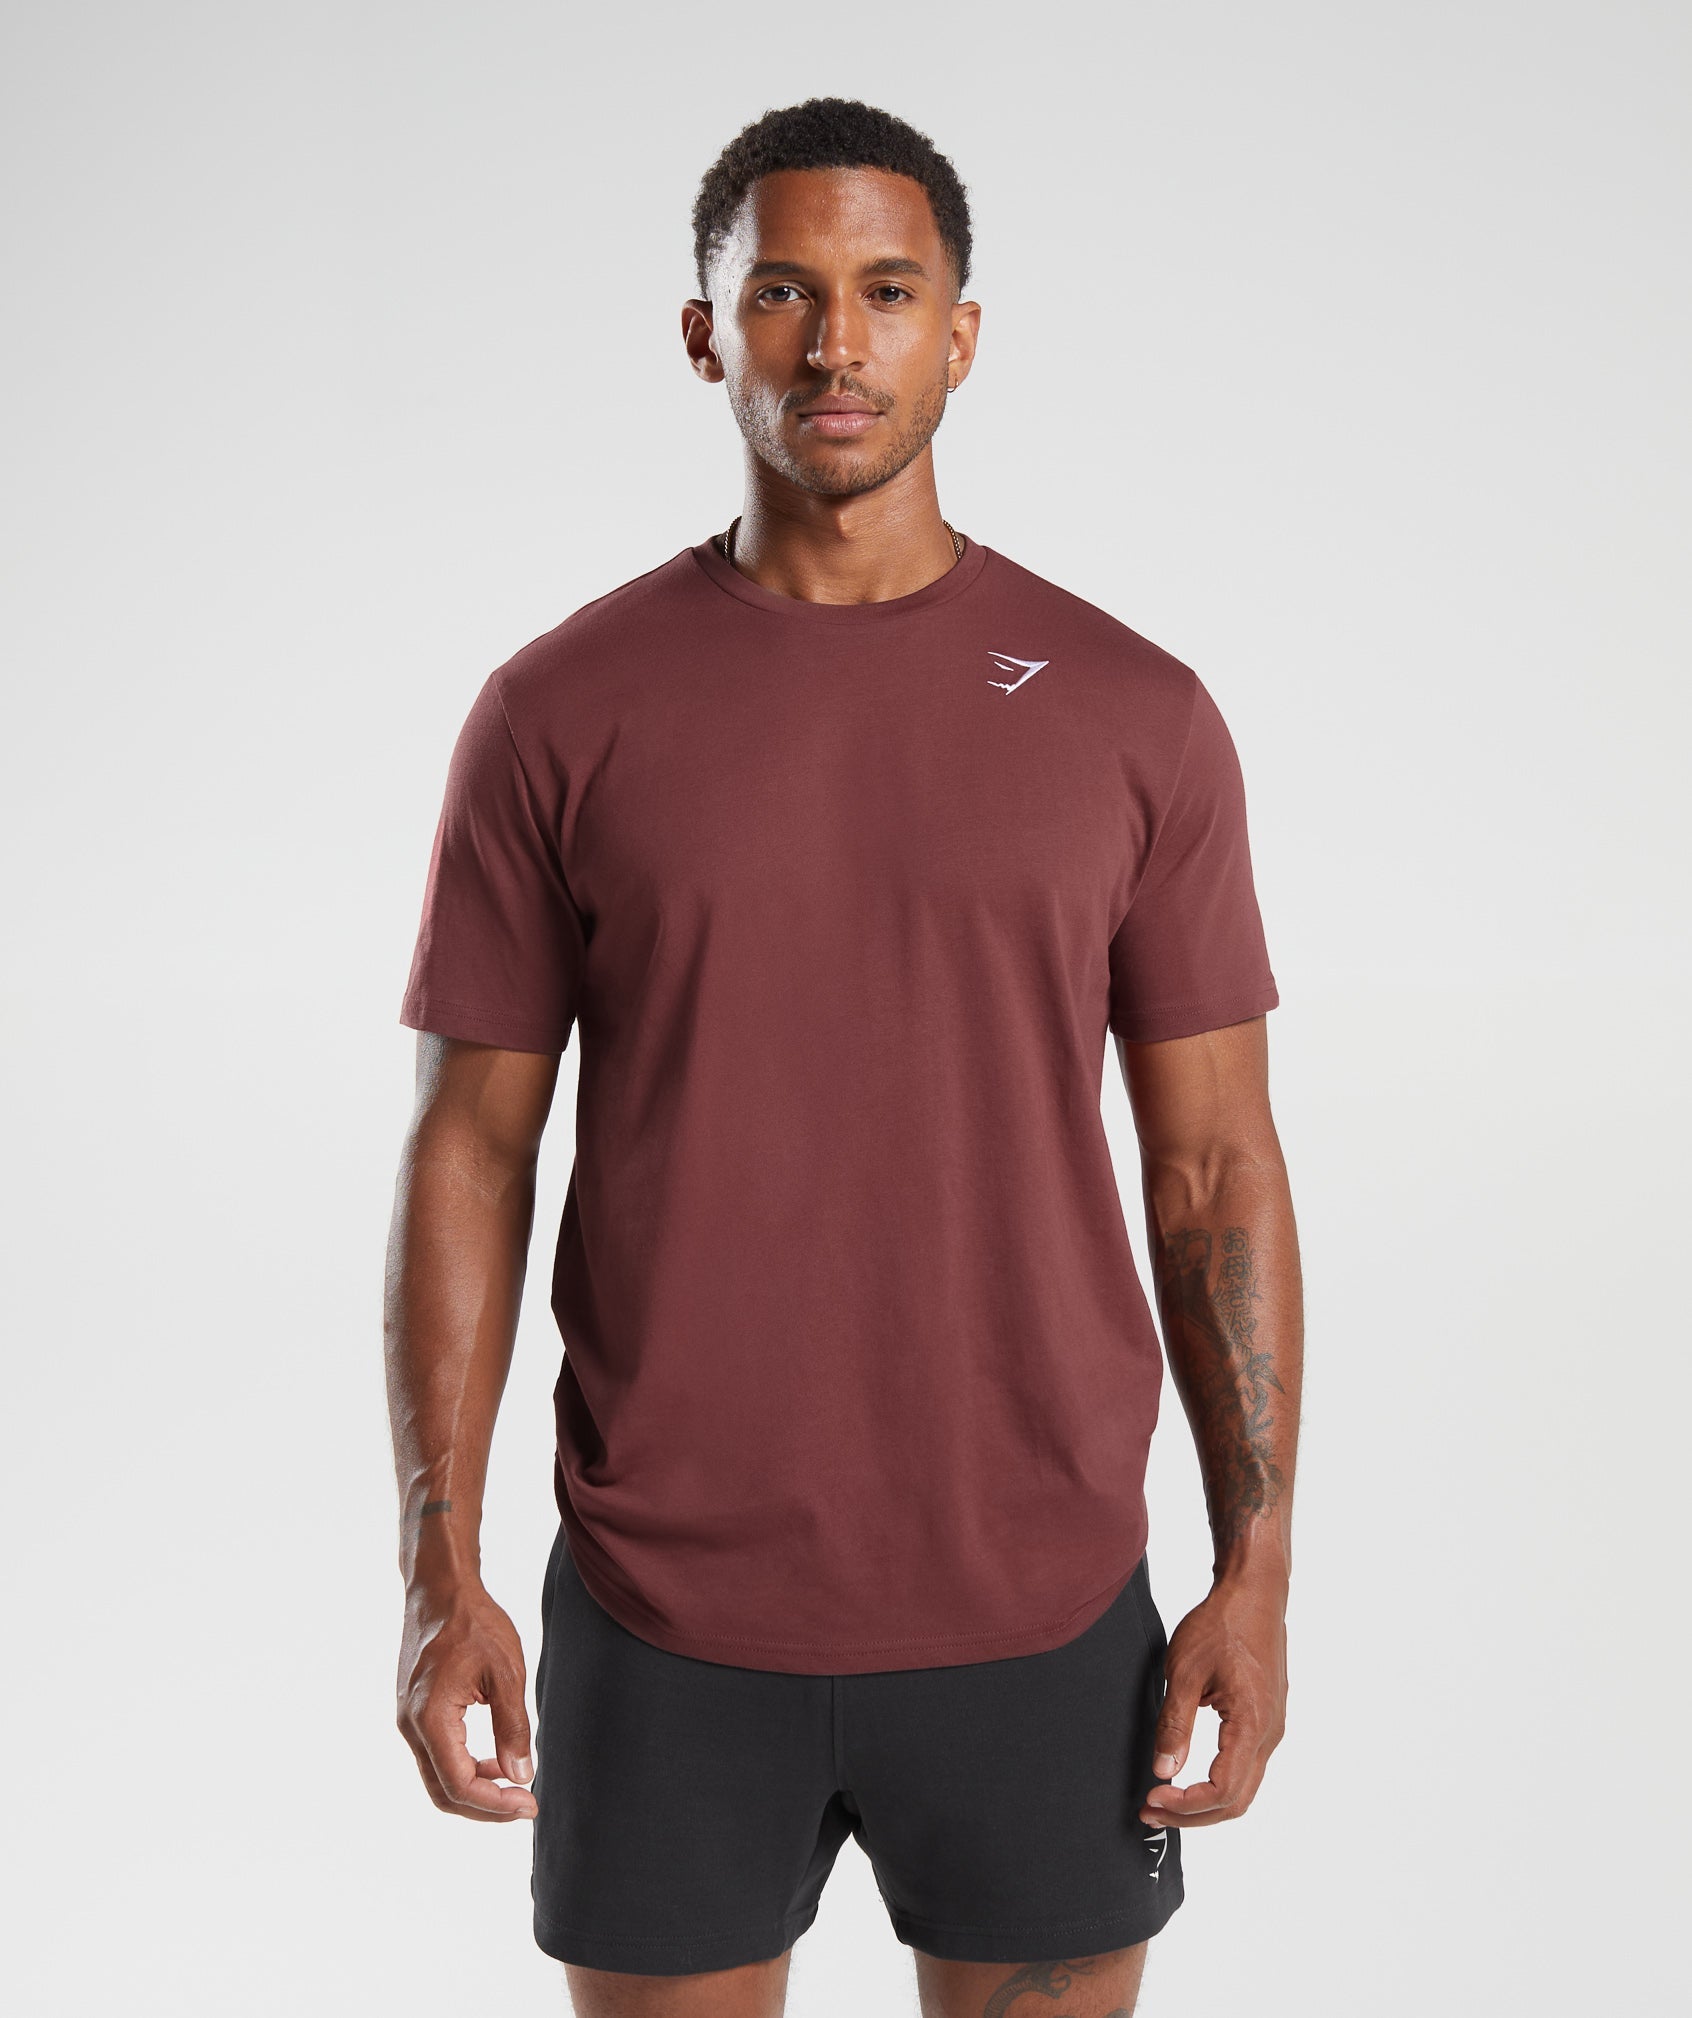 Crest T-Shirt in Washed Burgundy - view 1